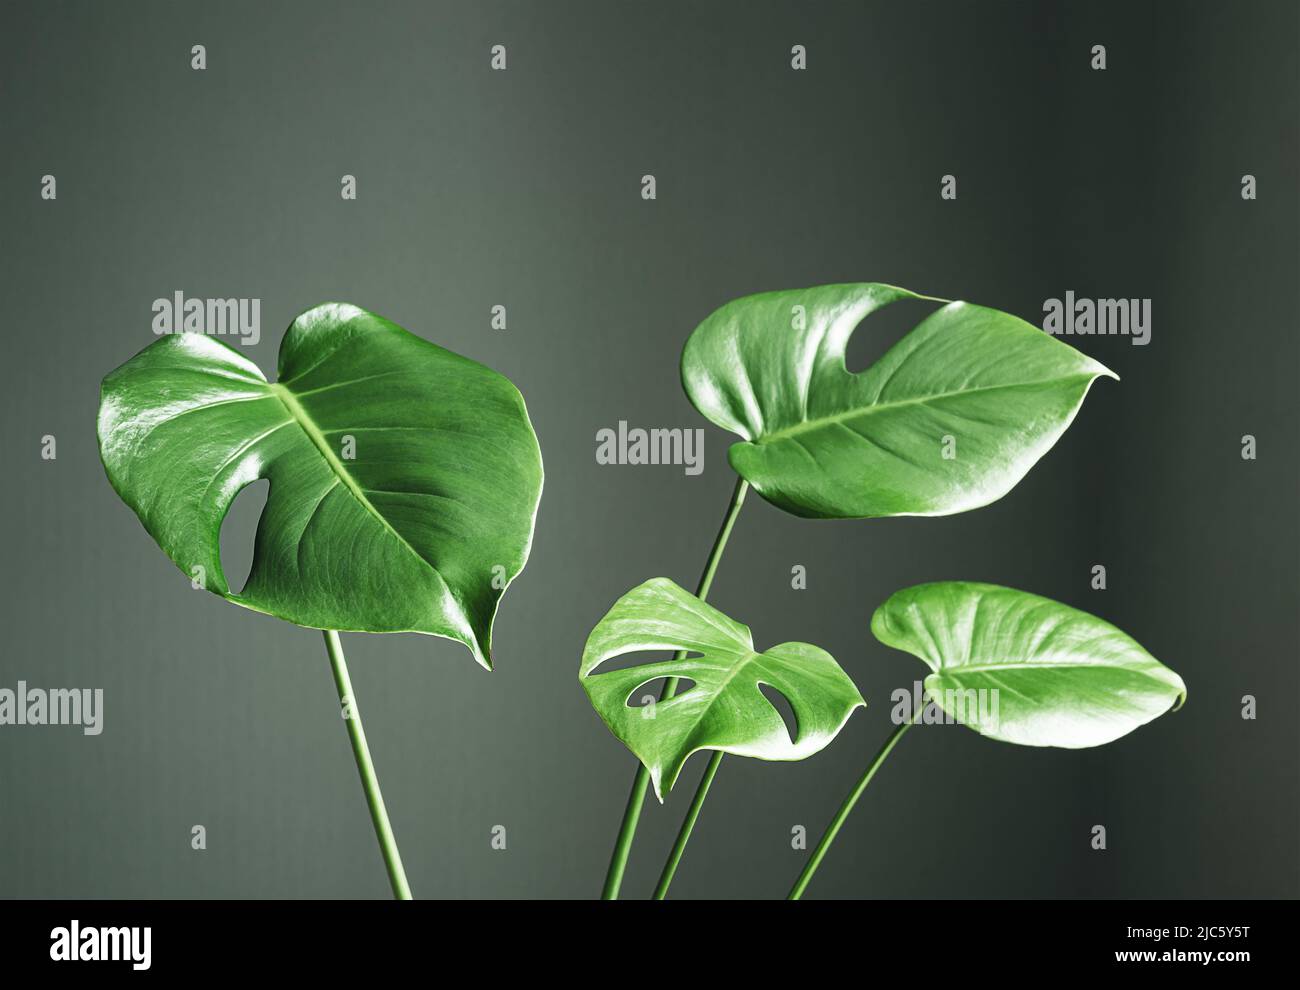 Leaves of young plant of Monstera deliciosa or Swiss Cheese Plant on a dark background close-up, home gardening and connecting with nature Stock Photo